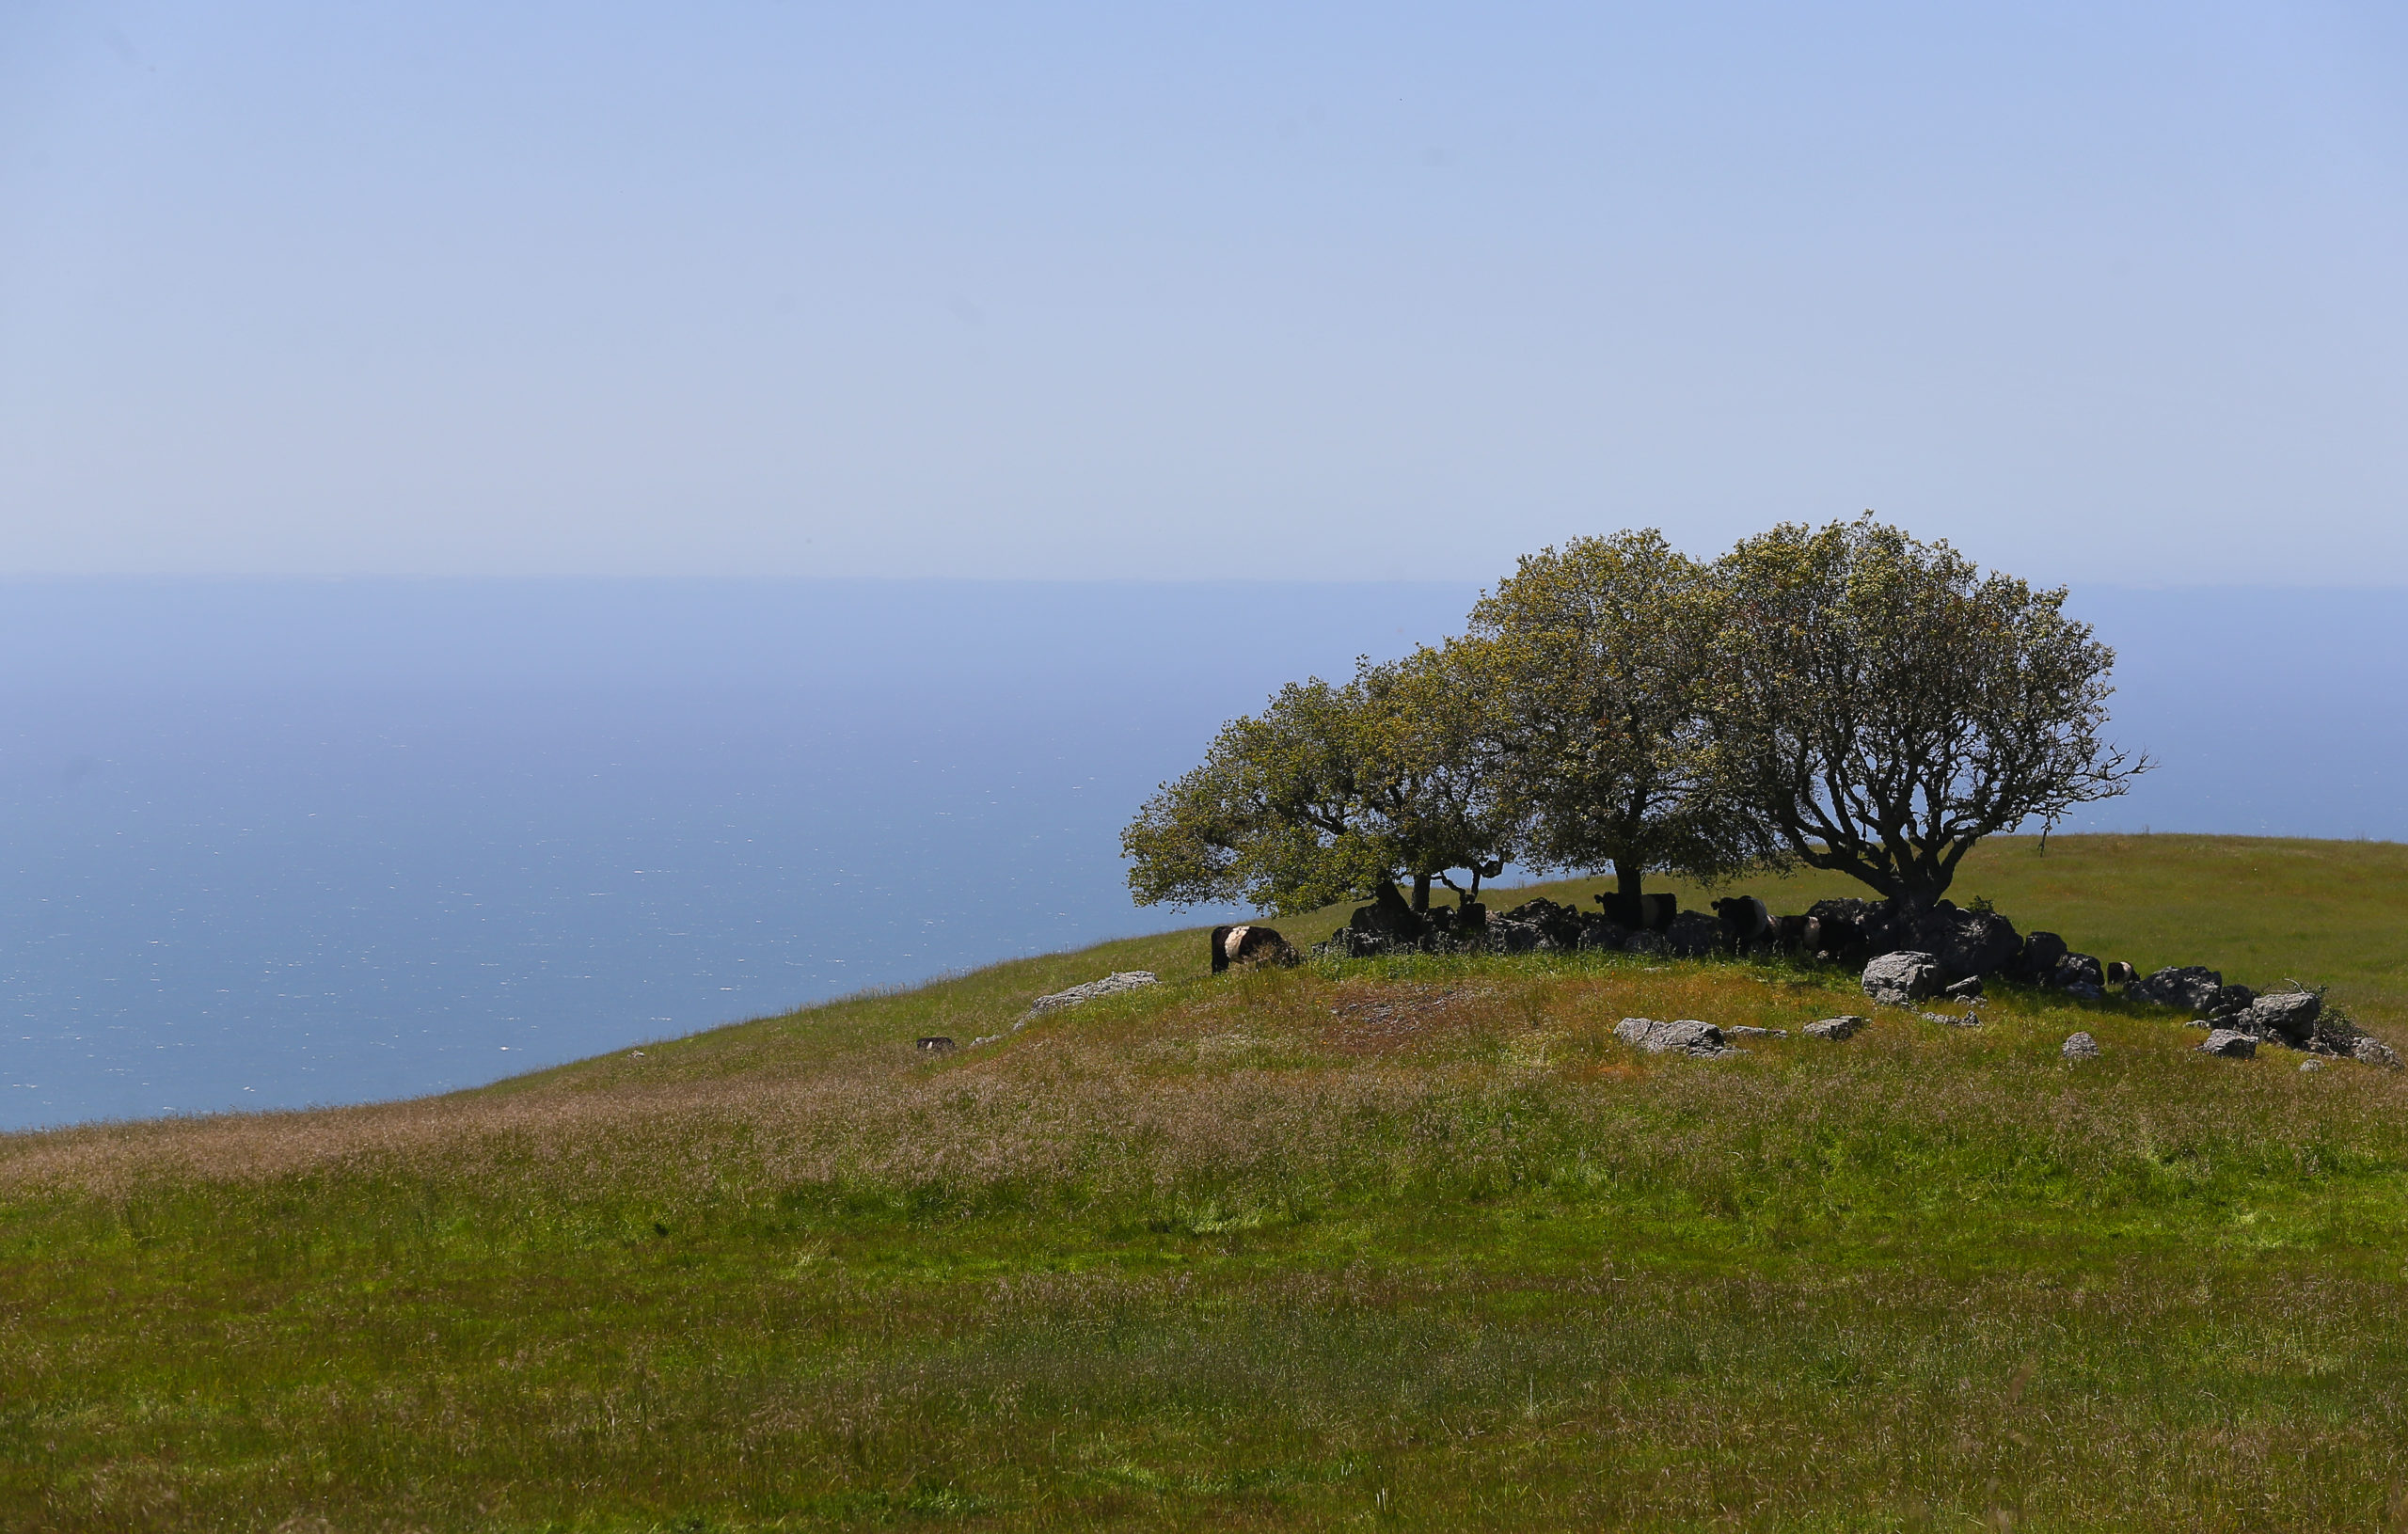 A small stand of trees provide shade for cows at the Jenner Headlands Preserve, near Jenner. (Christopher Chung/The Press Democrat)